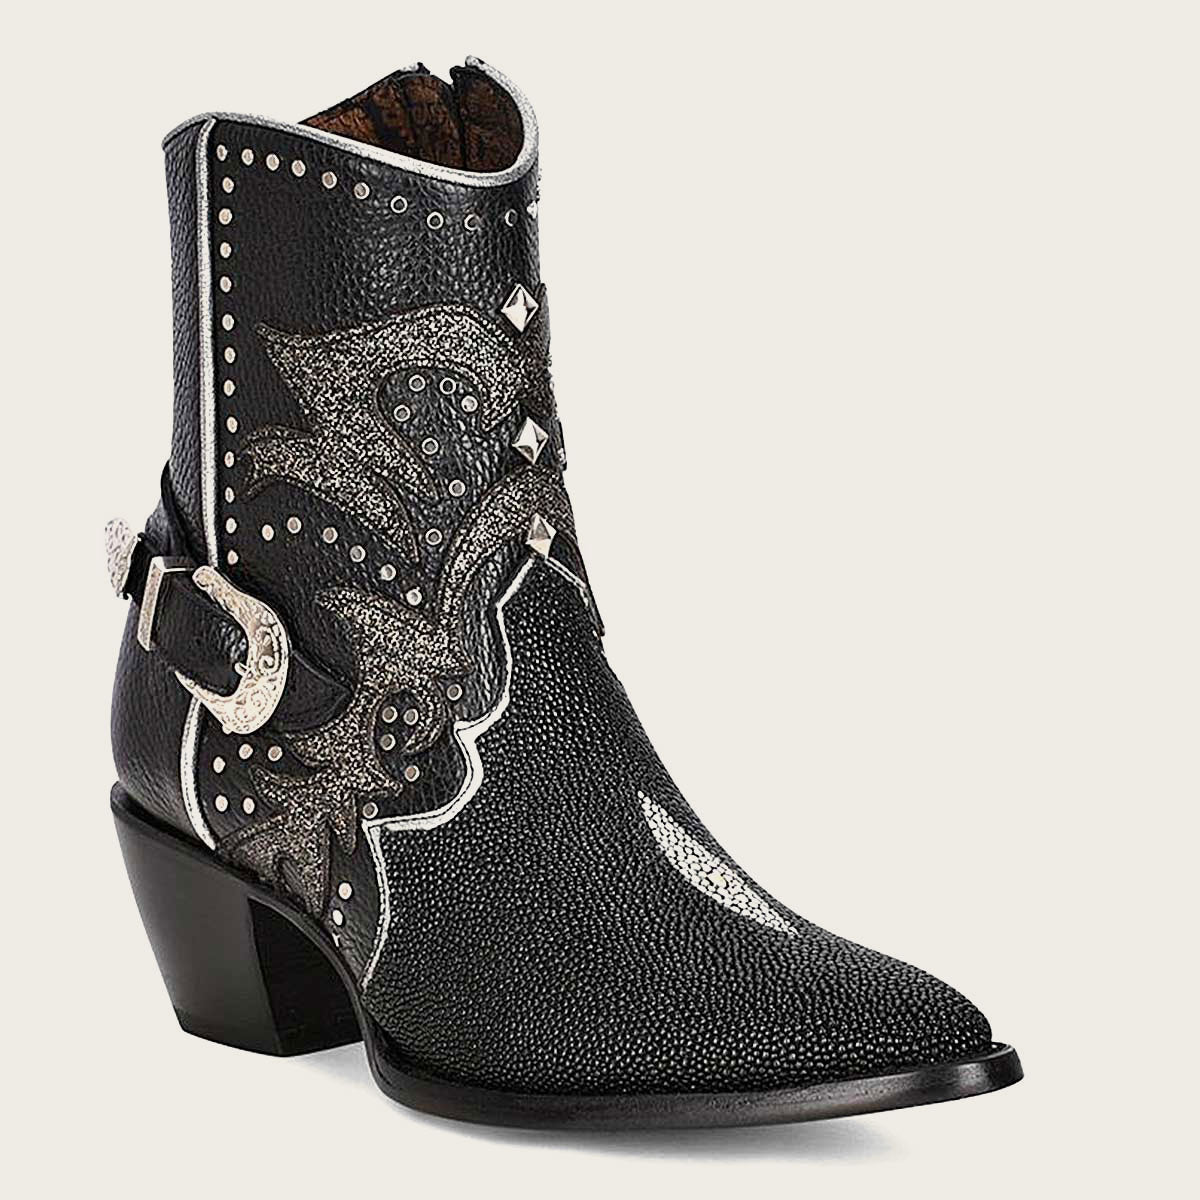 Unleash your style with our stunning ankle boots, crafted from genuine stingray and bovine leather.